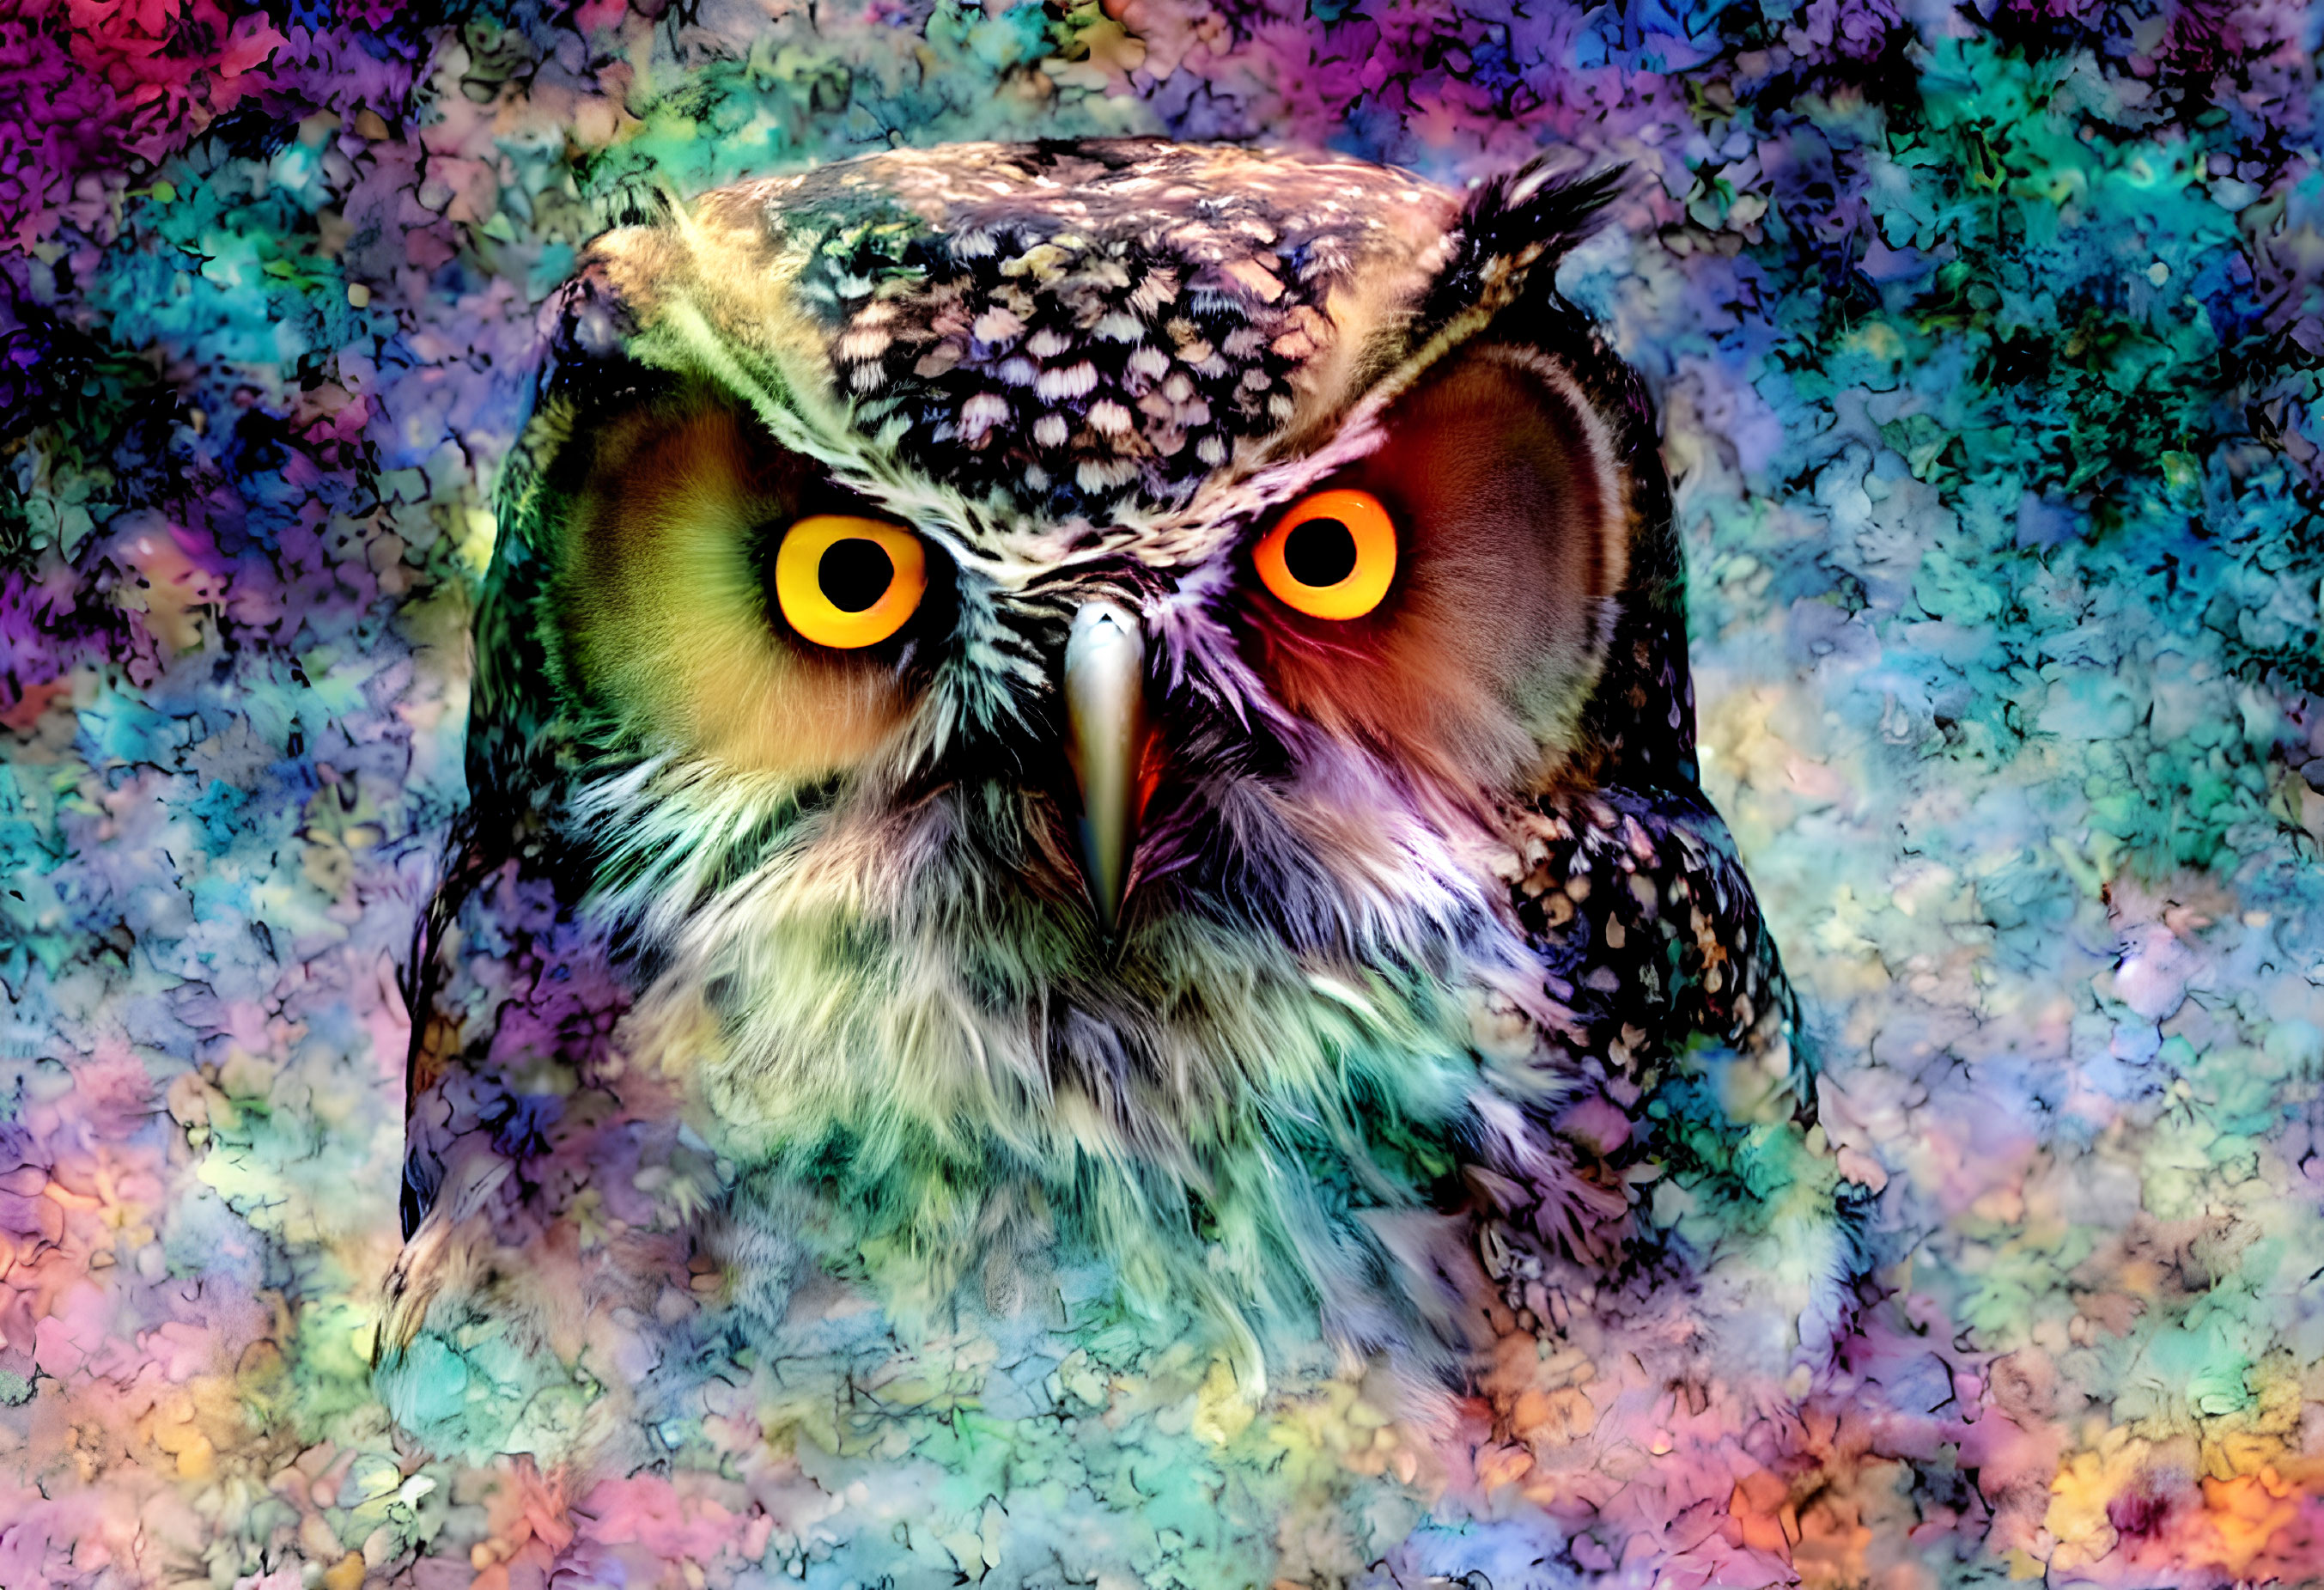 Colorful Close-Up of Owl with Yellow Eyes on Textured Background